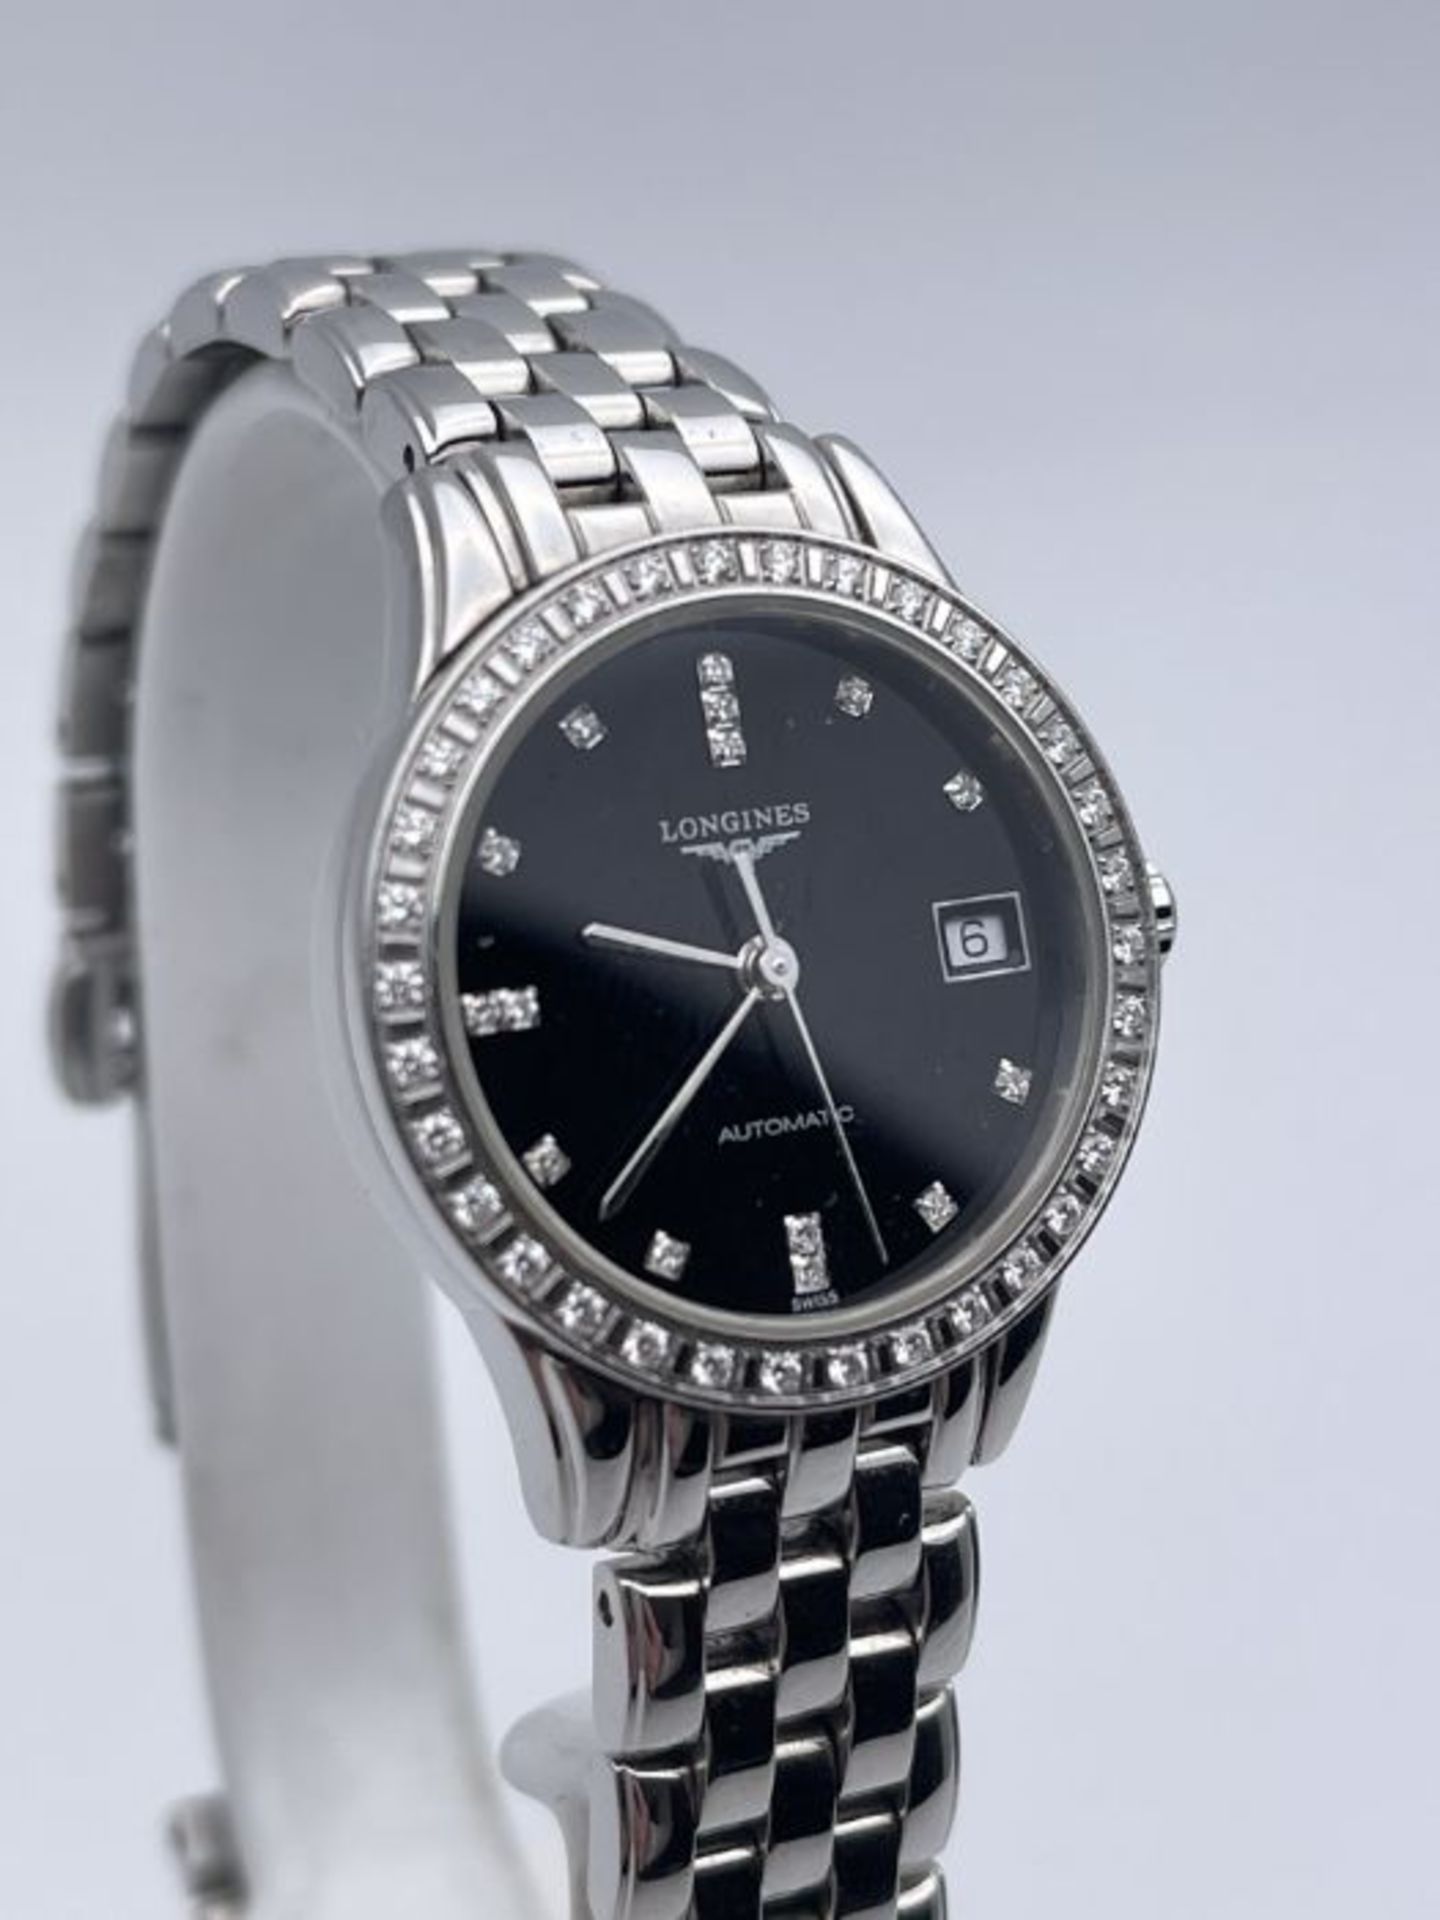 LONGINES AUTHENTIC FLAGSHIP WOMEN'S AUTOMATIC DIAMOND WATCH L42740 - Image 2 of 4